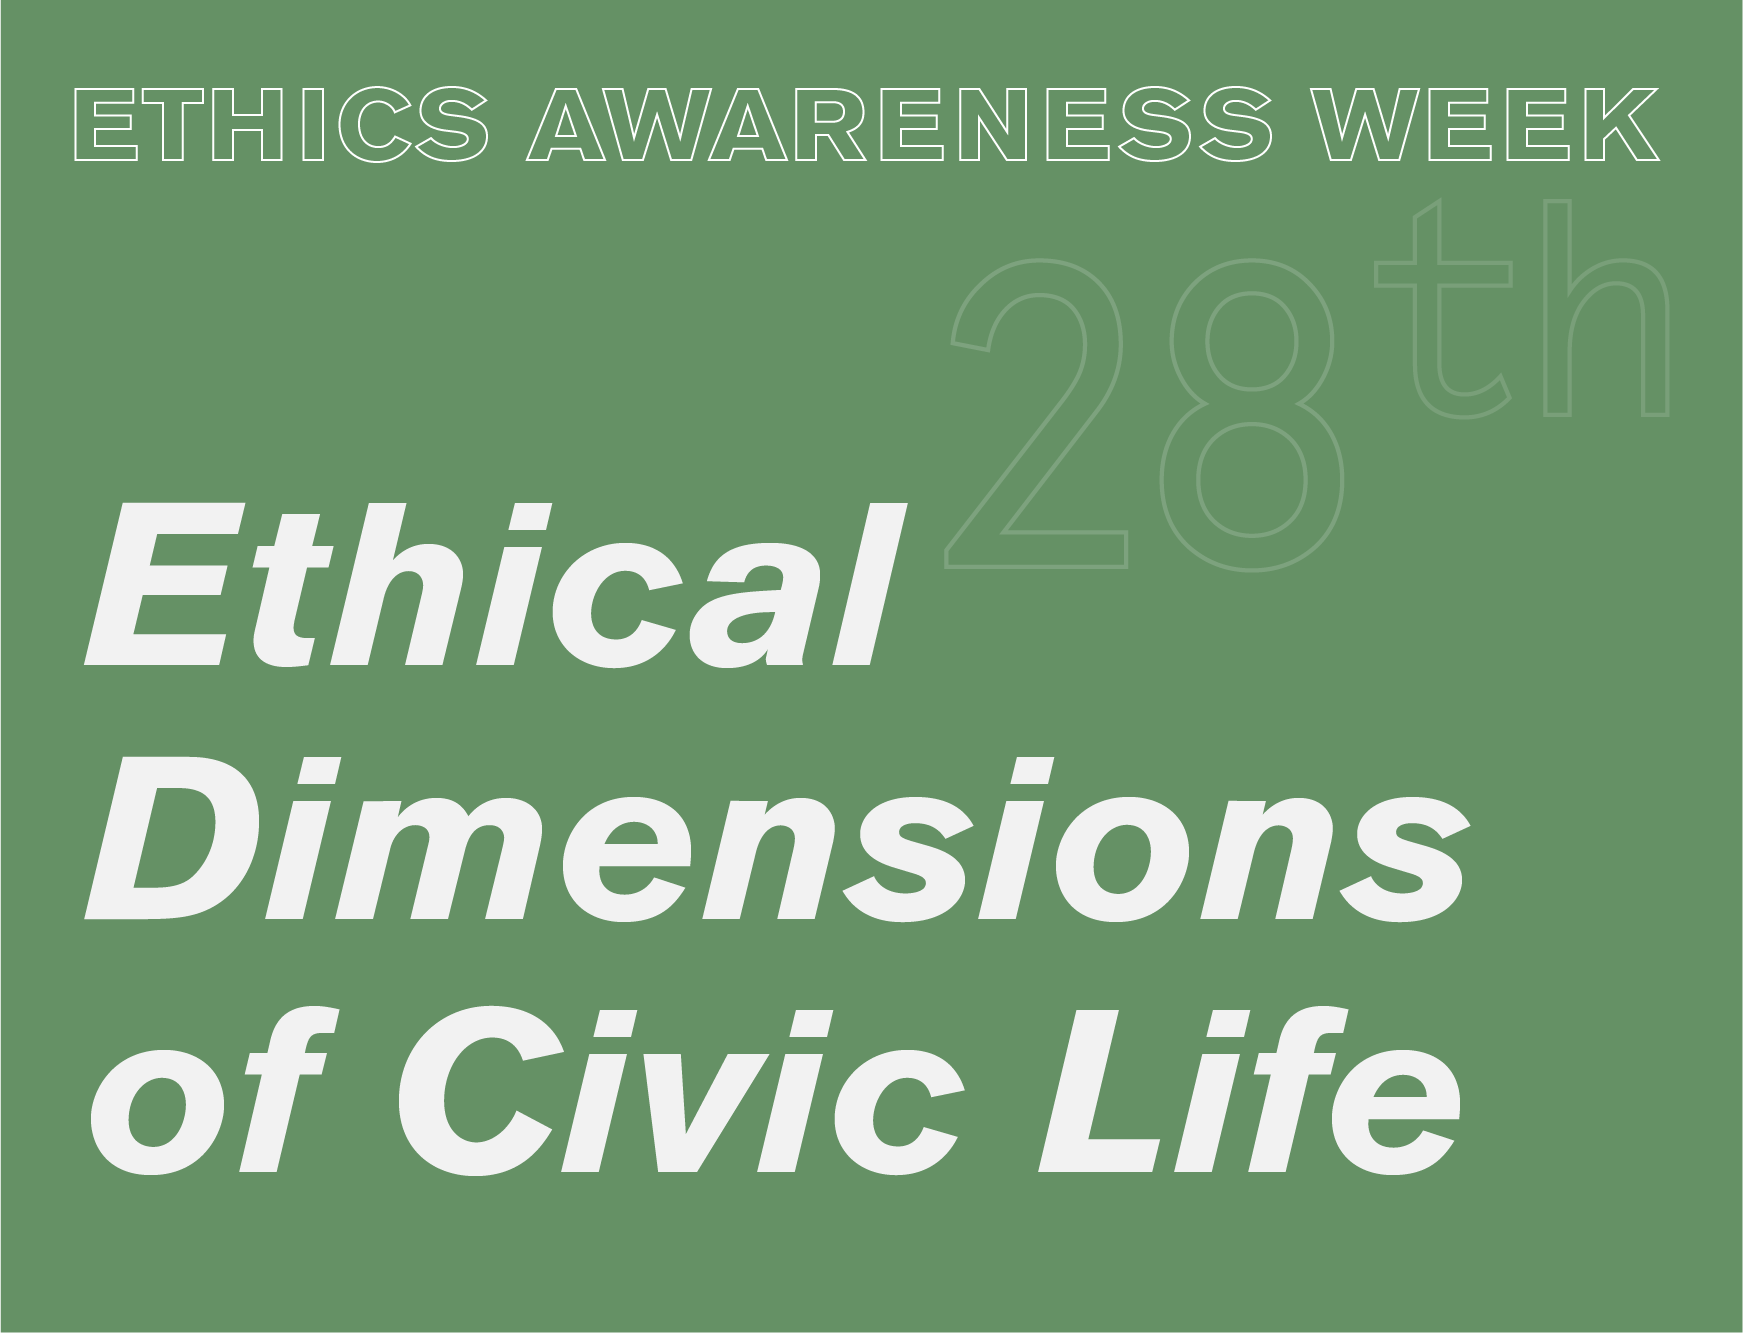 A graphic for the Ethics Awareness Week